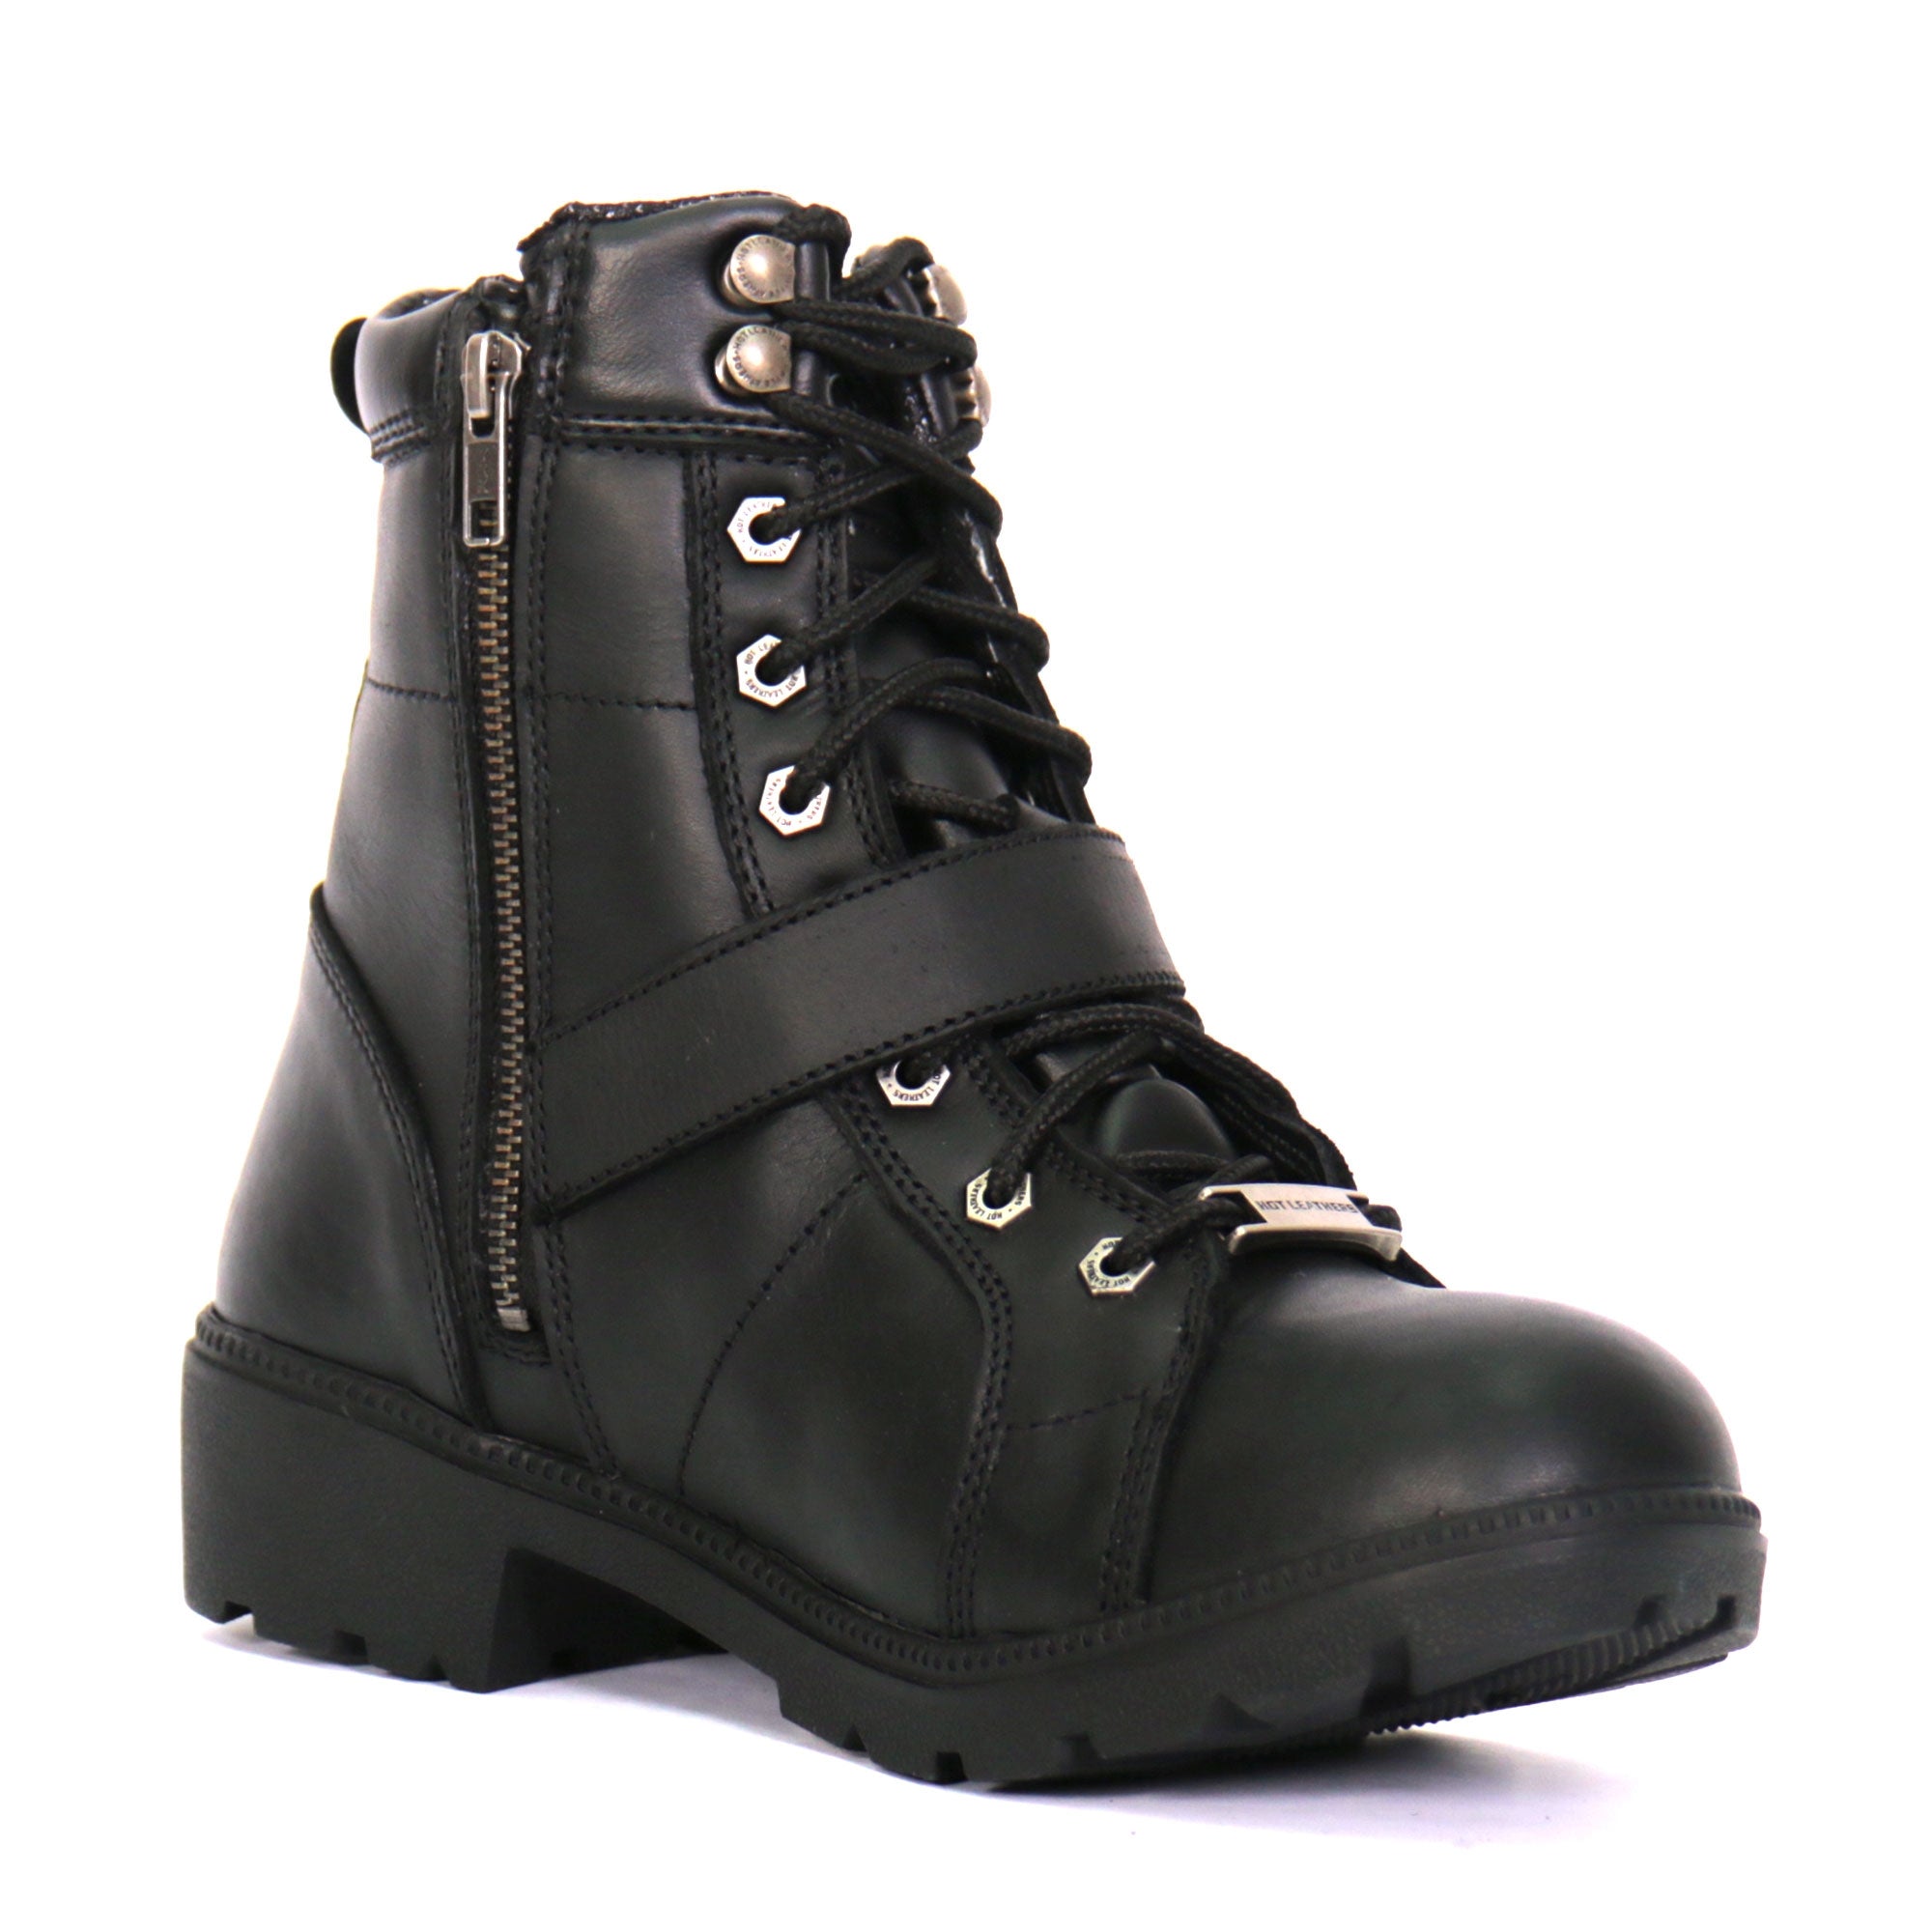 Hot Leathers Ladies 6-inch Black Lace-Up Leather Boots with Buckle Strap BTL1004